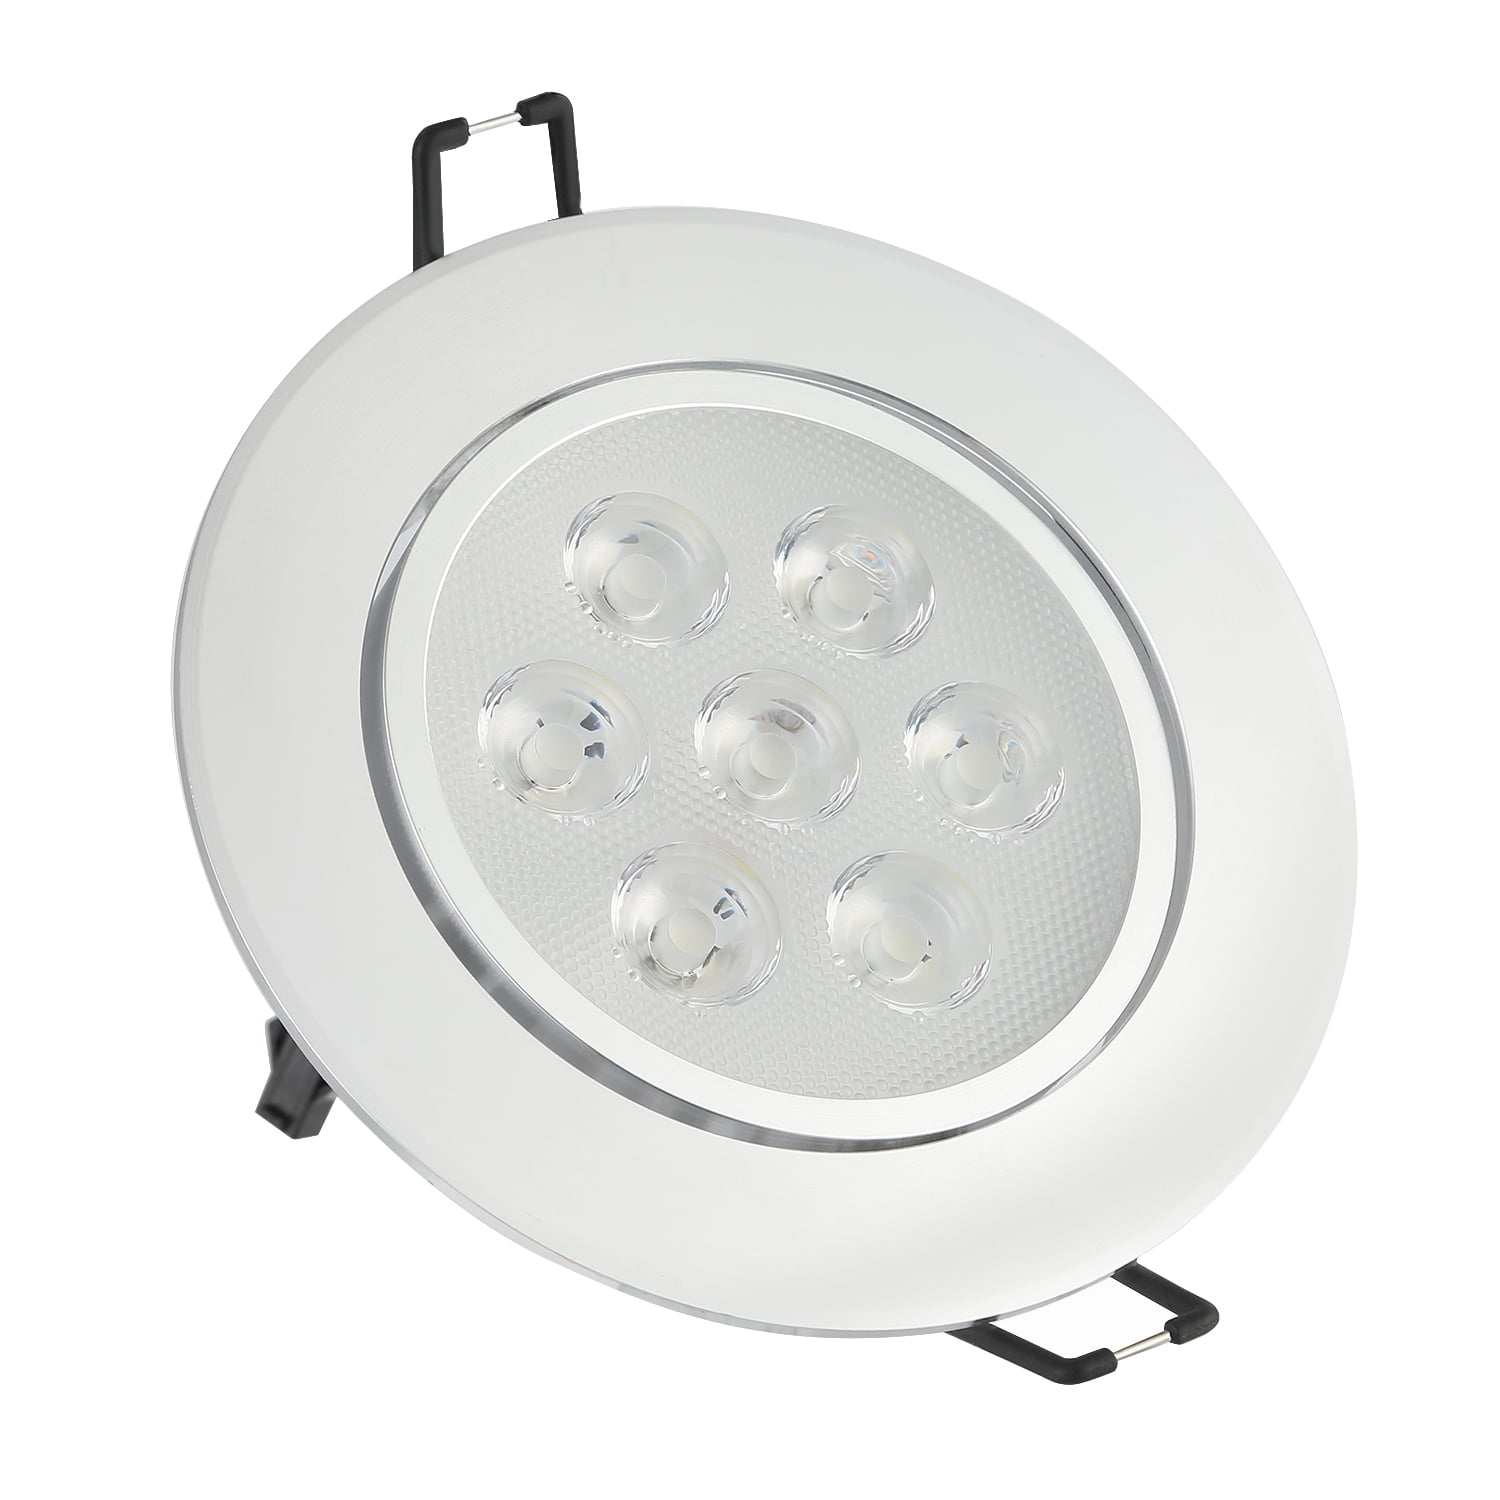 TKOOFN Pack of 6 7W LED Recessed Ceiling Light Cabinet ...